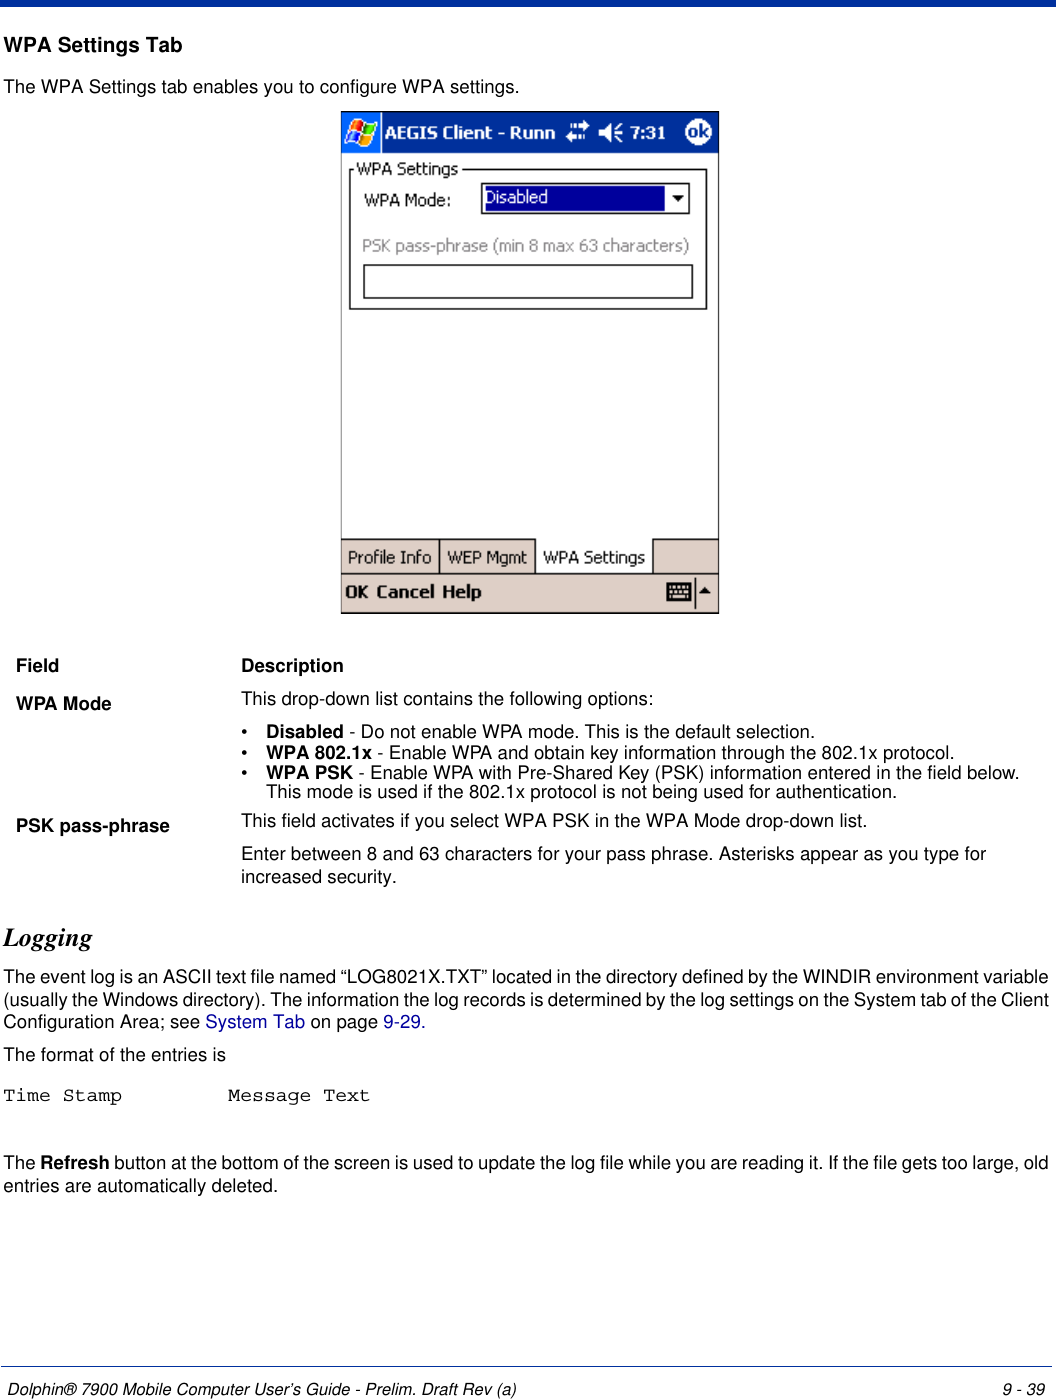 Dolphin® 7900 Mobile Computer User’s Guide - Prelim. Draft Rev (a) 9 - 39WPA Settings TabThe WPA Settings tab enables you to configure WPA settings.LoggingThe event log is an ASCII text file named “LOG8021X.TXT” located in the directory defined by the WINDIR environment variable (usually the Windows directory). The information the log records is determined by the log settings on the System tab of the Client Configuration Area; see System Tab on page 9-29.The format of the entries is Time Stamp Message TextThe Refresh button at the bottom of the screen is used to update the log file while you are reading it. If the file gets too large, old entries are automatically deleted.Field  DescriptionWPA Mode This drop-down list contains the following options:•           Disabled - Do not enable WPA mode. This is the default selection.•           WPA 802.1x - Enable WPA and obtain key information through the 802.1x protocol. •           WPA PSK - Enable WPA with Pre-Shared Key (PSK) information entered in the field below. This mode is used if the 802.1x protocol is not being used for authentication.PSK pass-phrase This field activates if you select WPA PSK in the WPA Mode drop-down list.Enter between 8 and 63 characters for your pass phrase. Asterisks appear as you type for increased security.